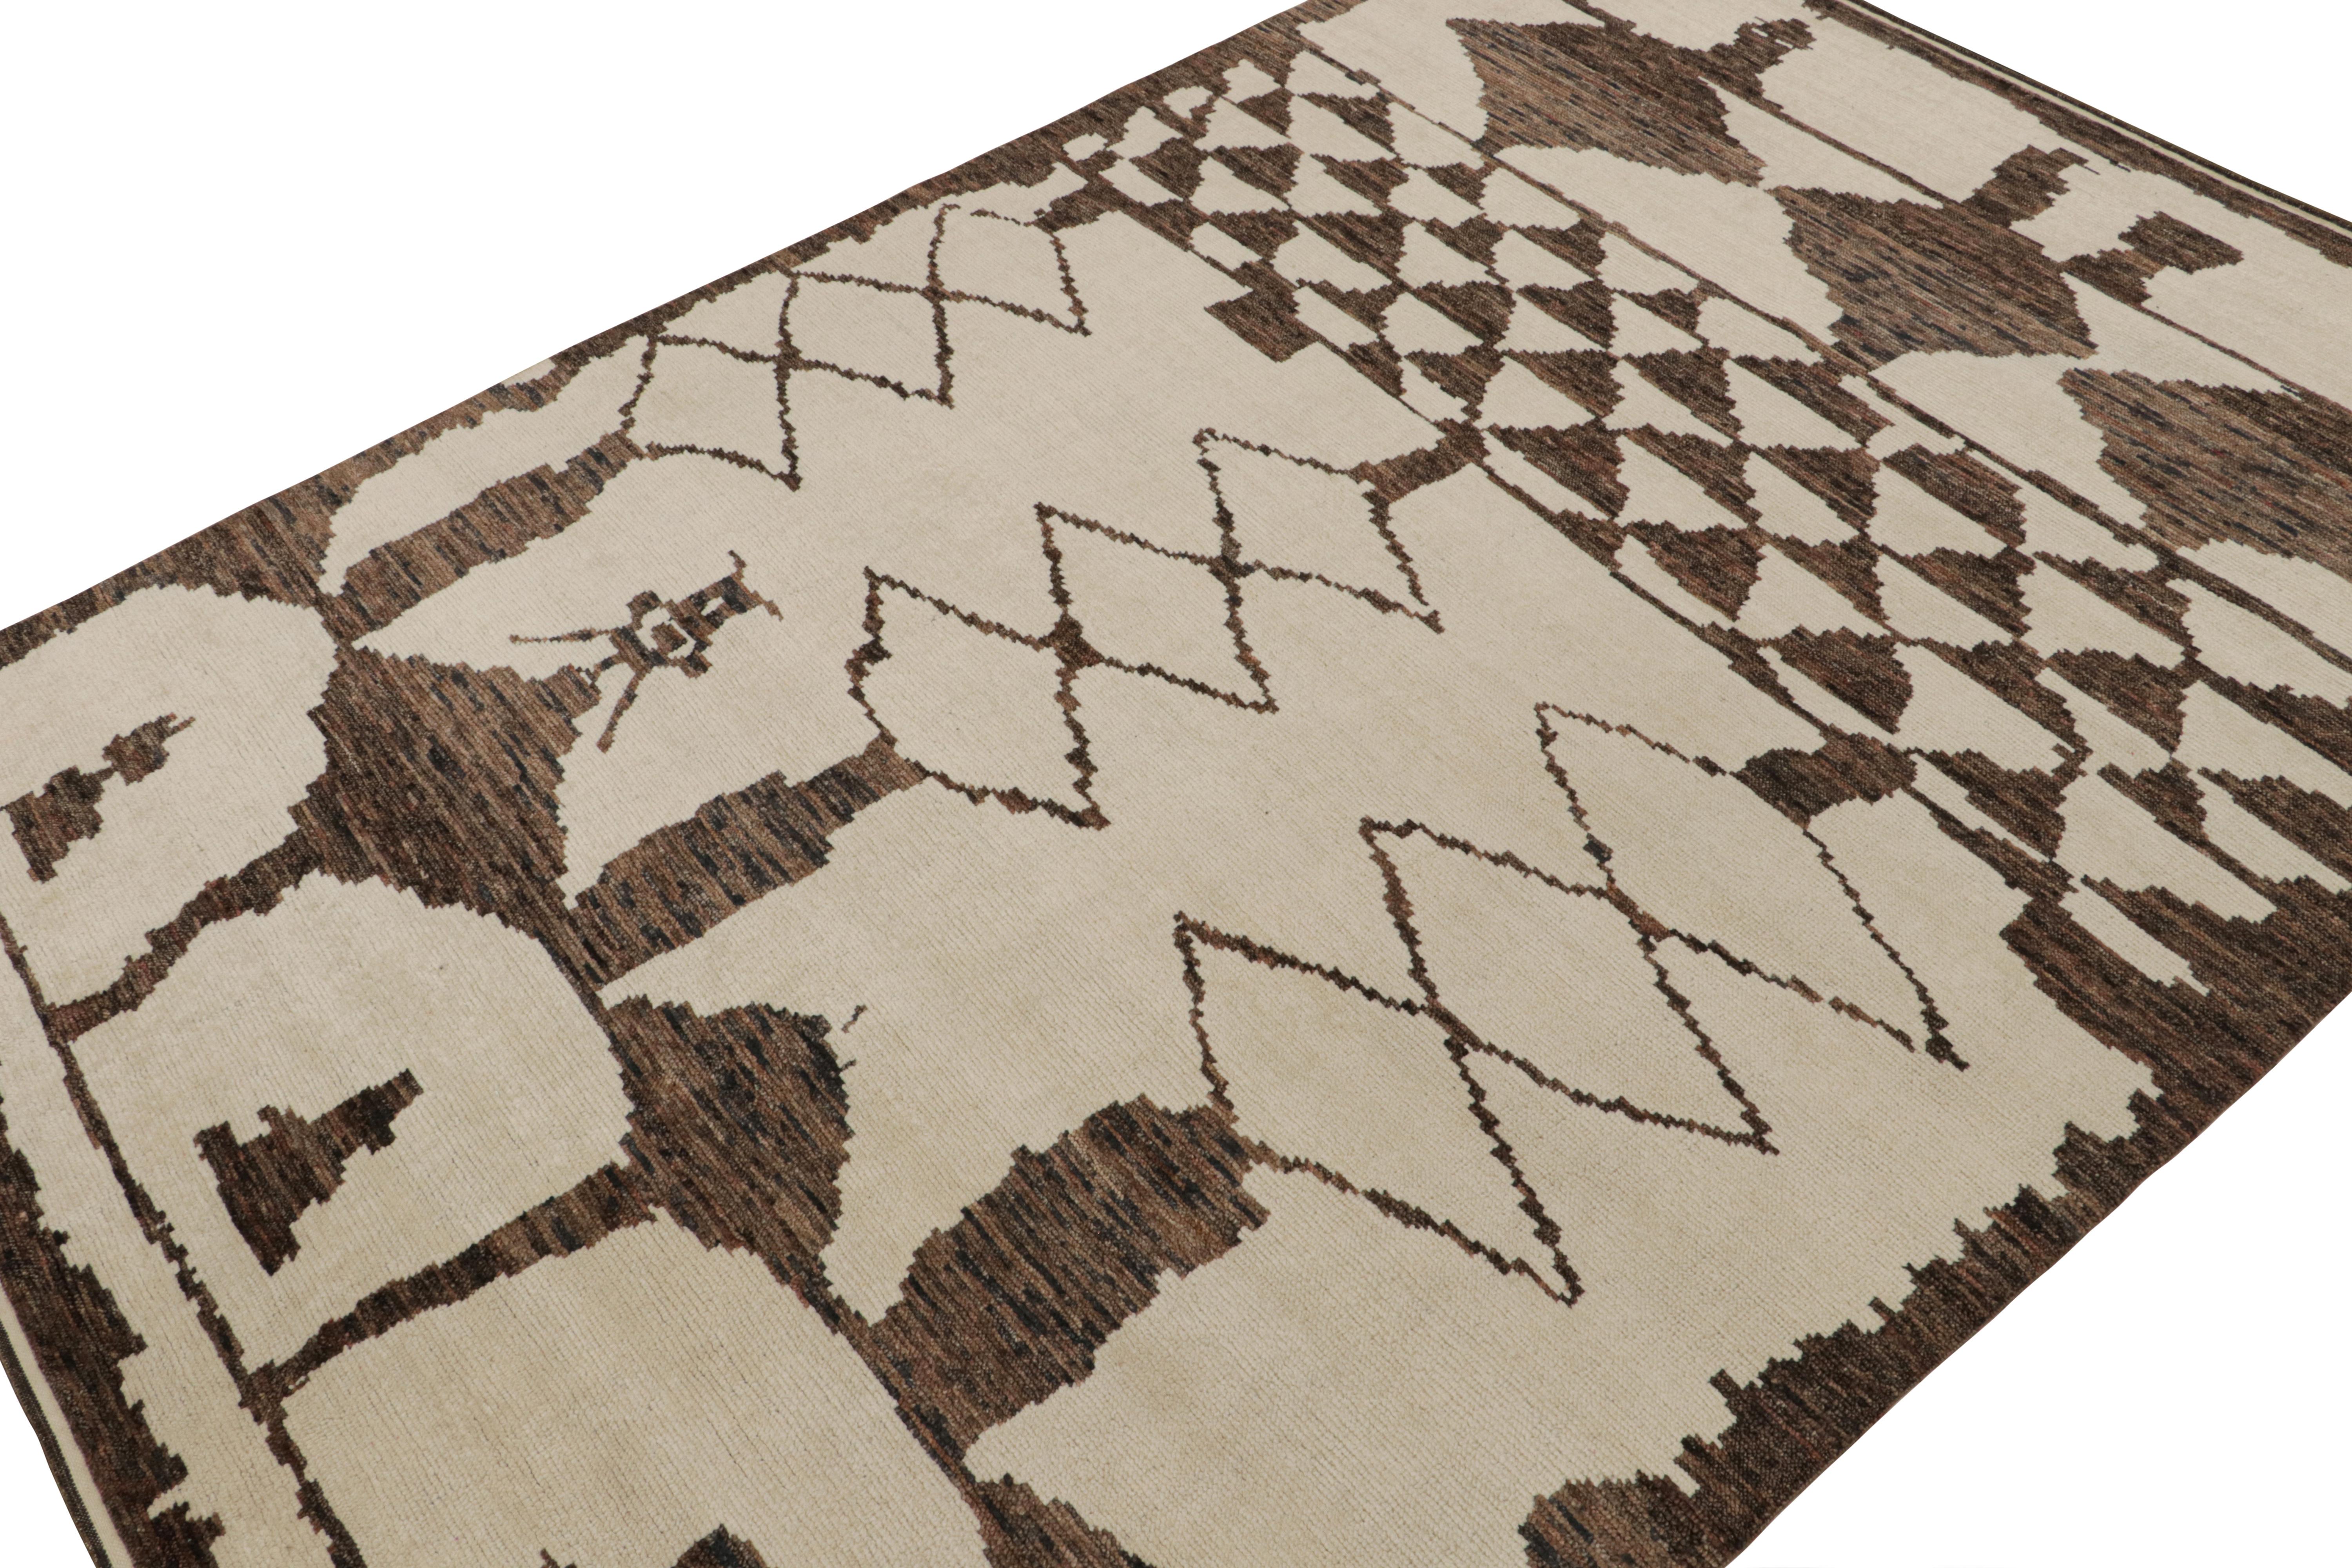 Hand-knotted in wool, this 10x14 contemporary rug is a new addition to the Moroccan rug collection by Rug & Kilim. 

On the Design

This rug enjoys a cream and beige undertone with chocolate brown lozenges and other geometric patterns of primitivist